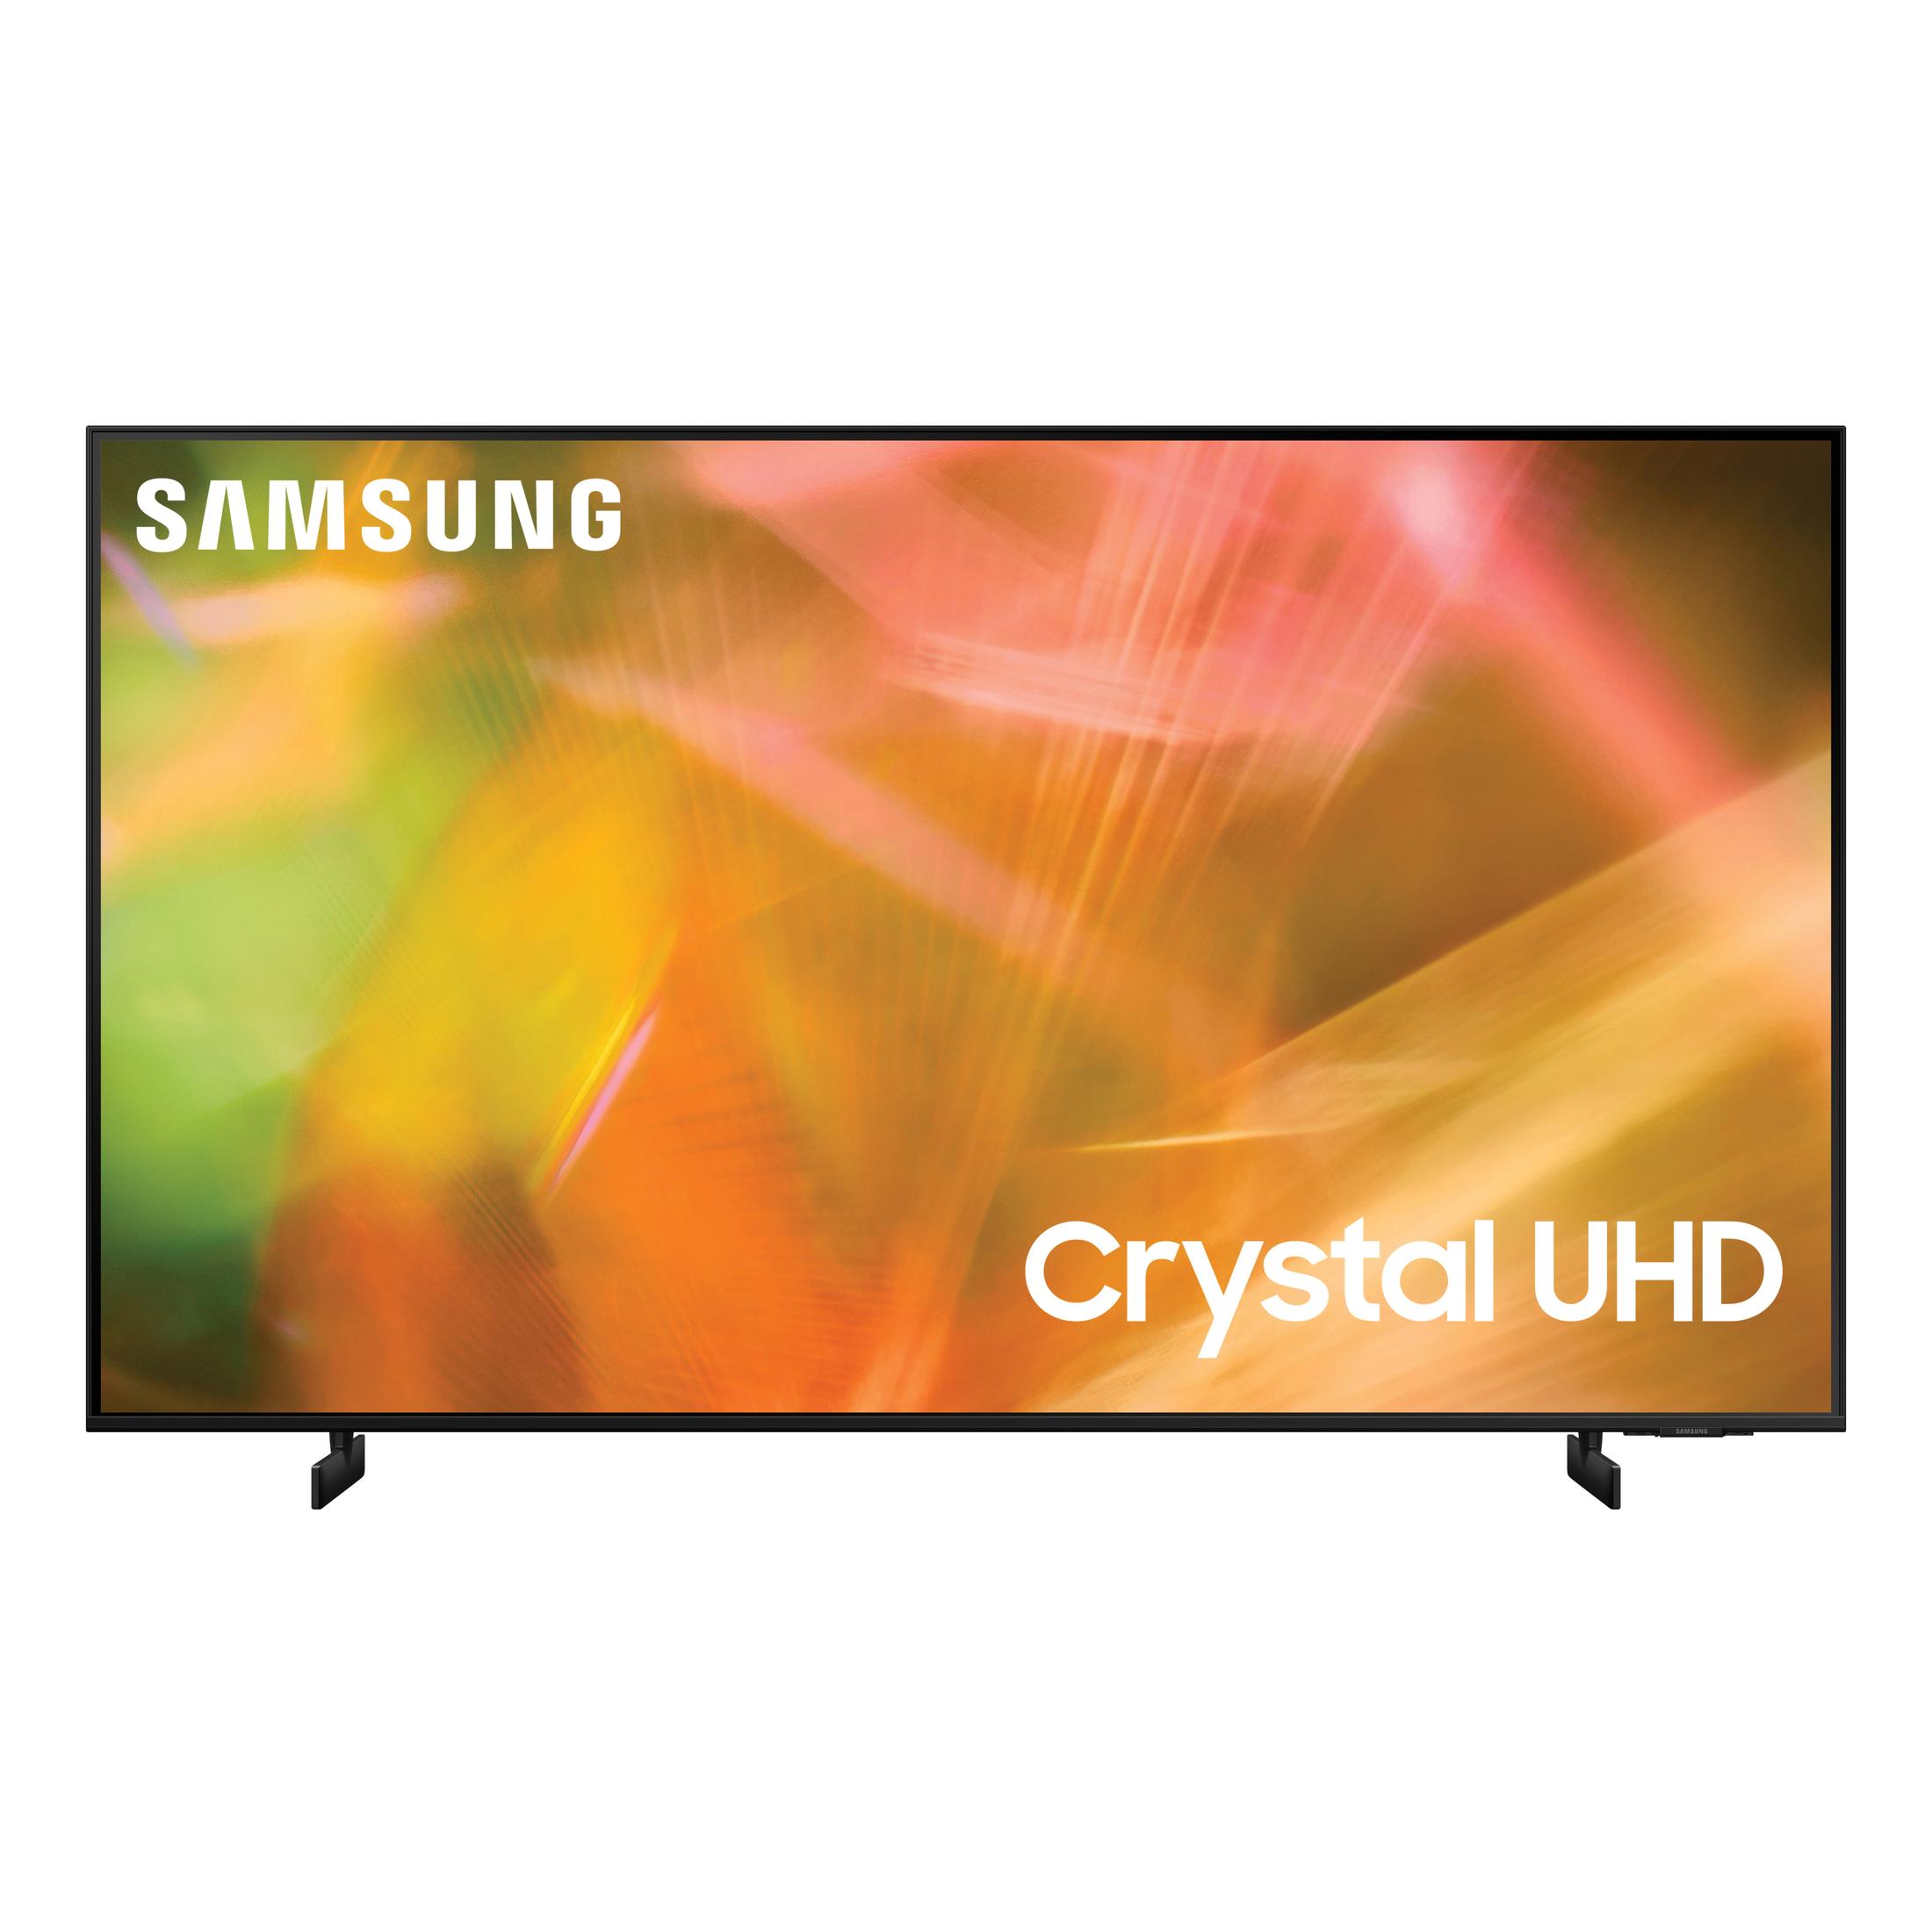 SAMSUNG 43" Class 4K Crystal UHD (2160P) LED Smart TV with HDR UN43AU8000B - image 1 of 10